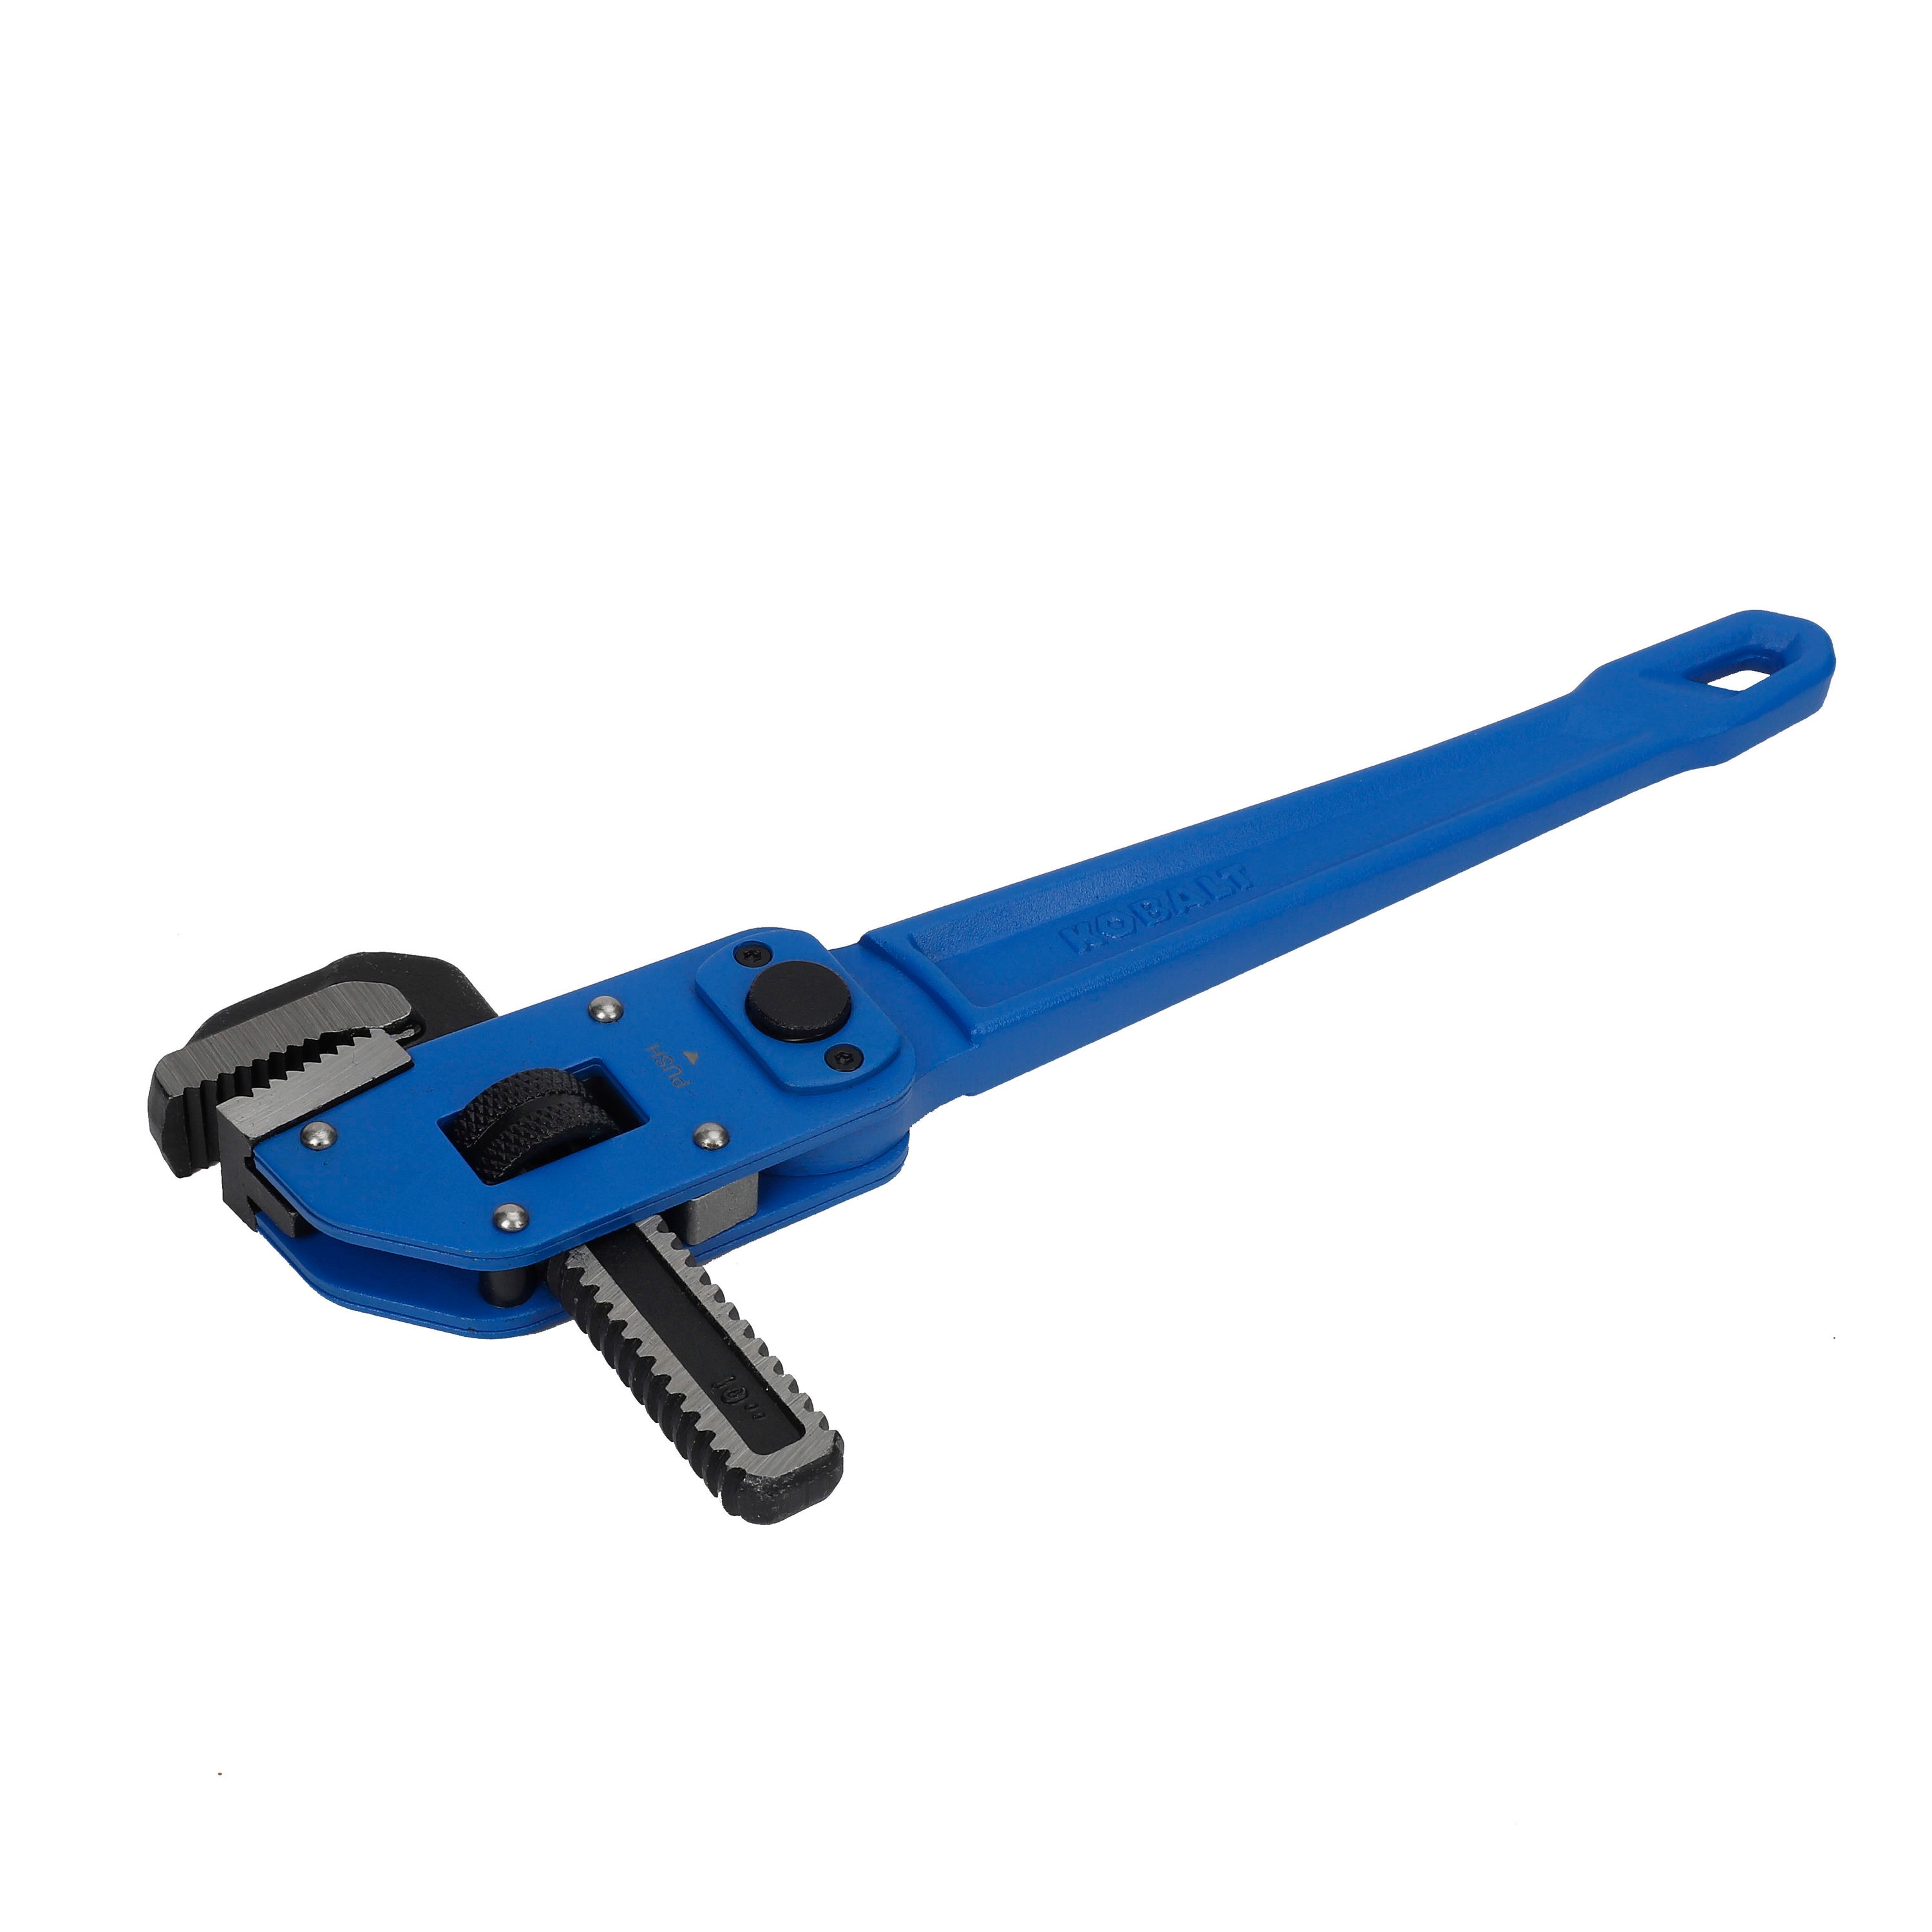 Kobalt Wrench in the Plumbing Wrenches & Specialty Tools